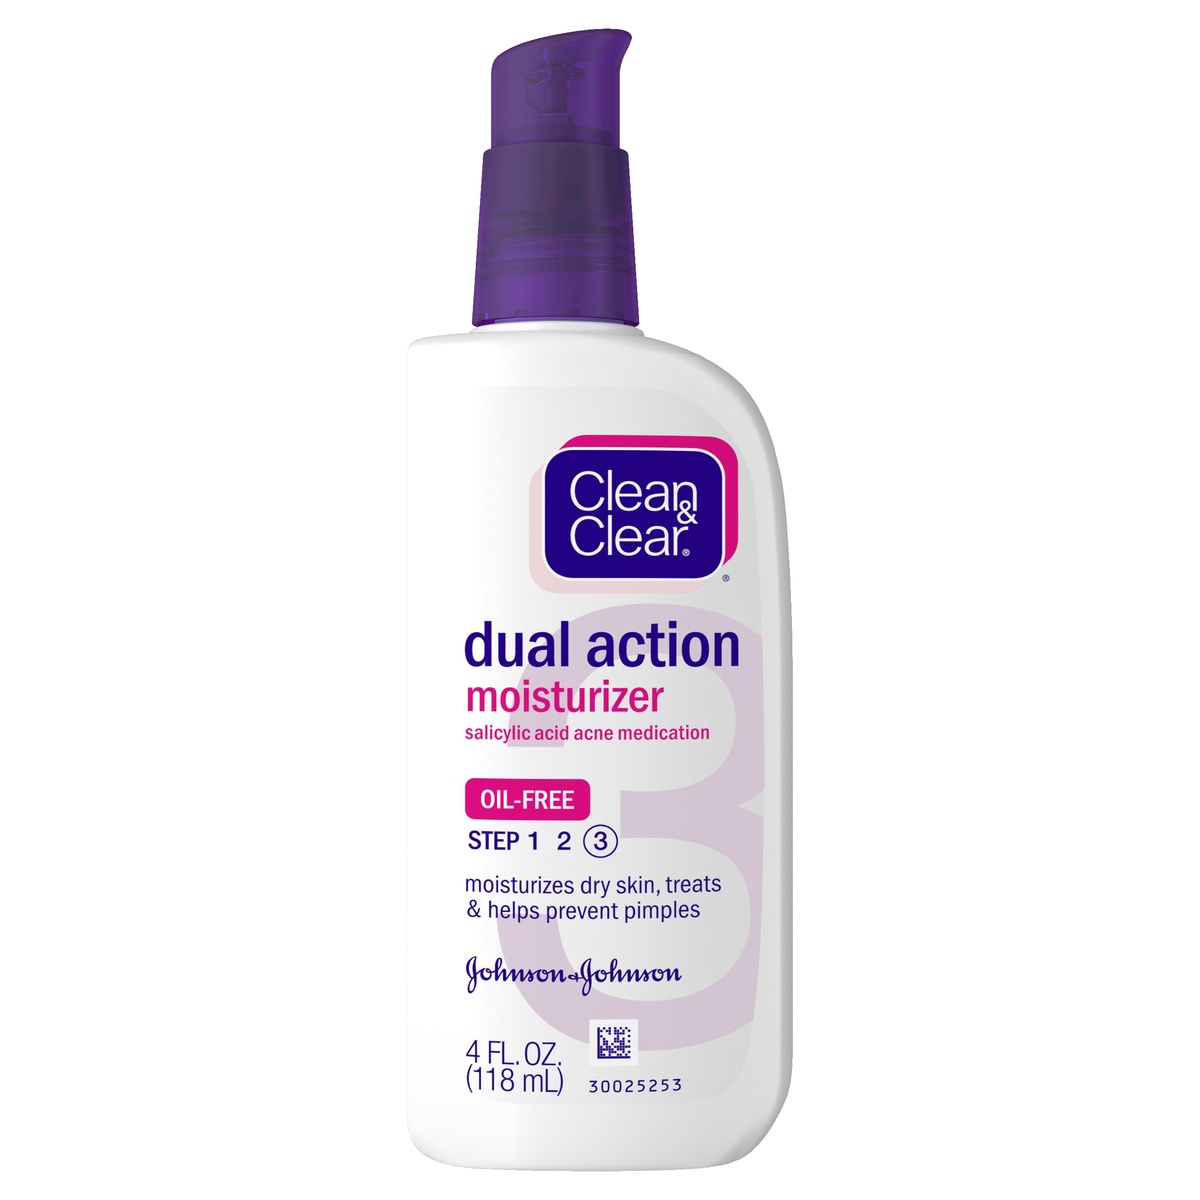 slide 6 of 8, Clean & Clear Essentials Dual Action Facial Moisturizer, 0.5% Salicylic Acid Acne Medication to Moisturize Dry Skin, Treat Acne & Help Prevent Pimples, Oil Free for Acne-Prone Skin, 4 fl oz